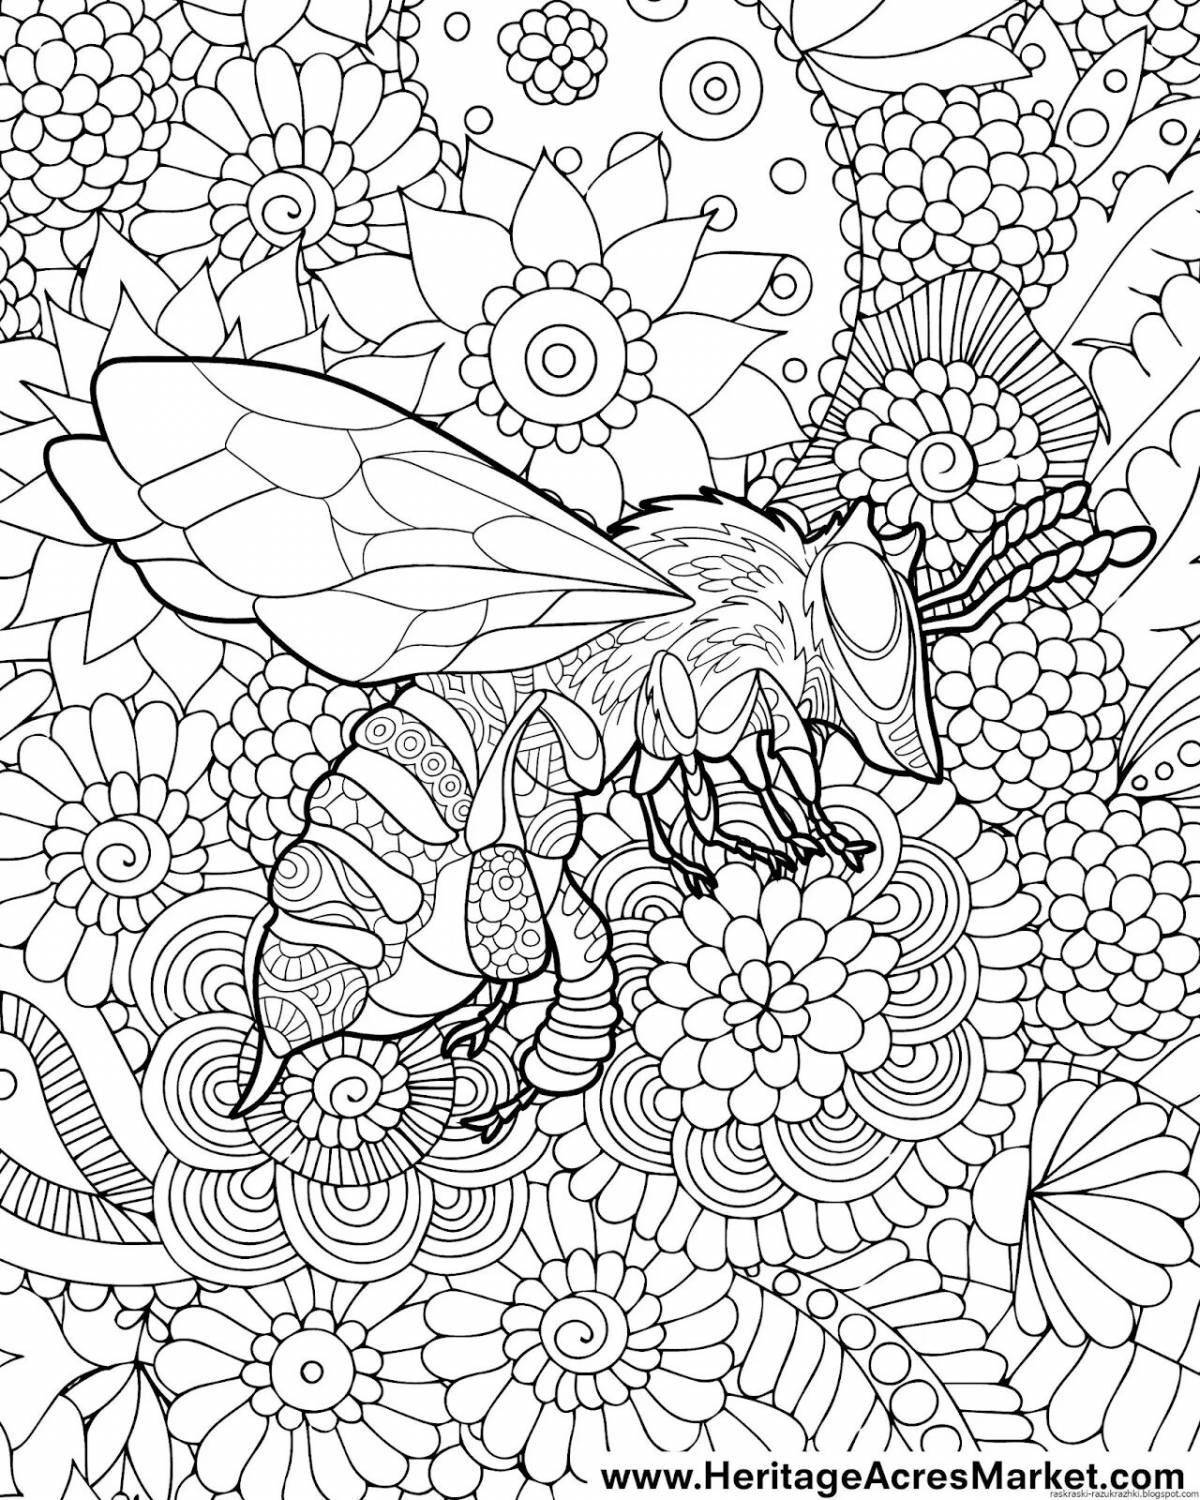 Serene coloring page relax antistress for adults